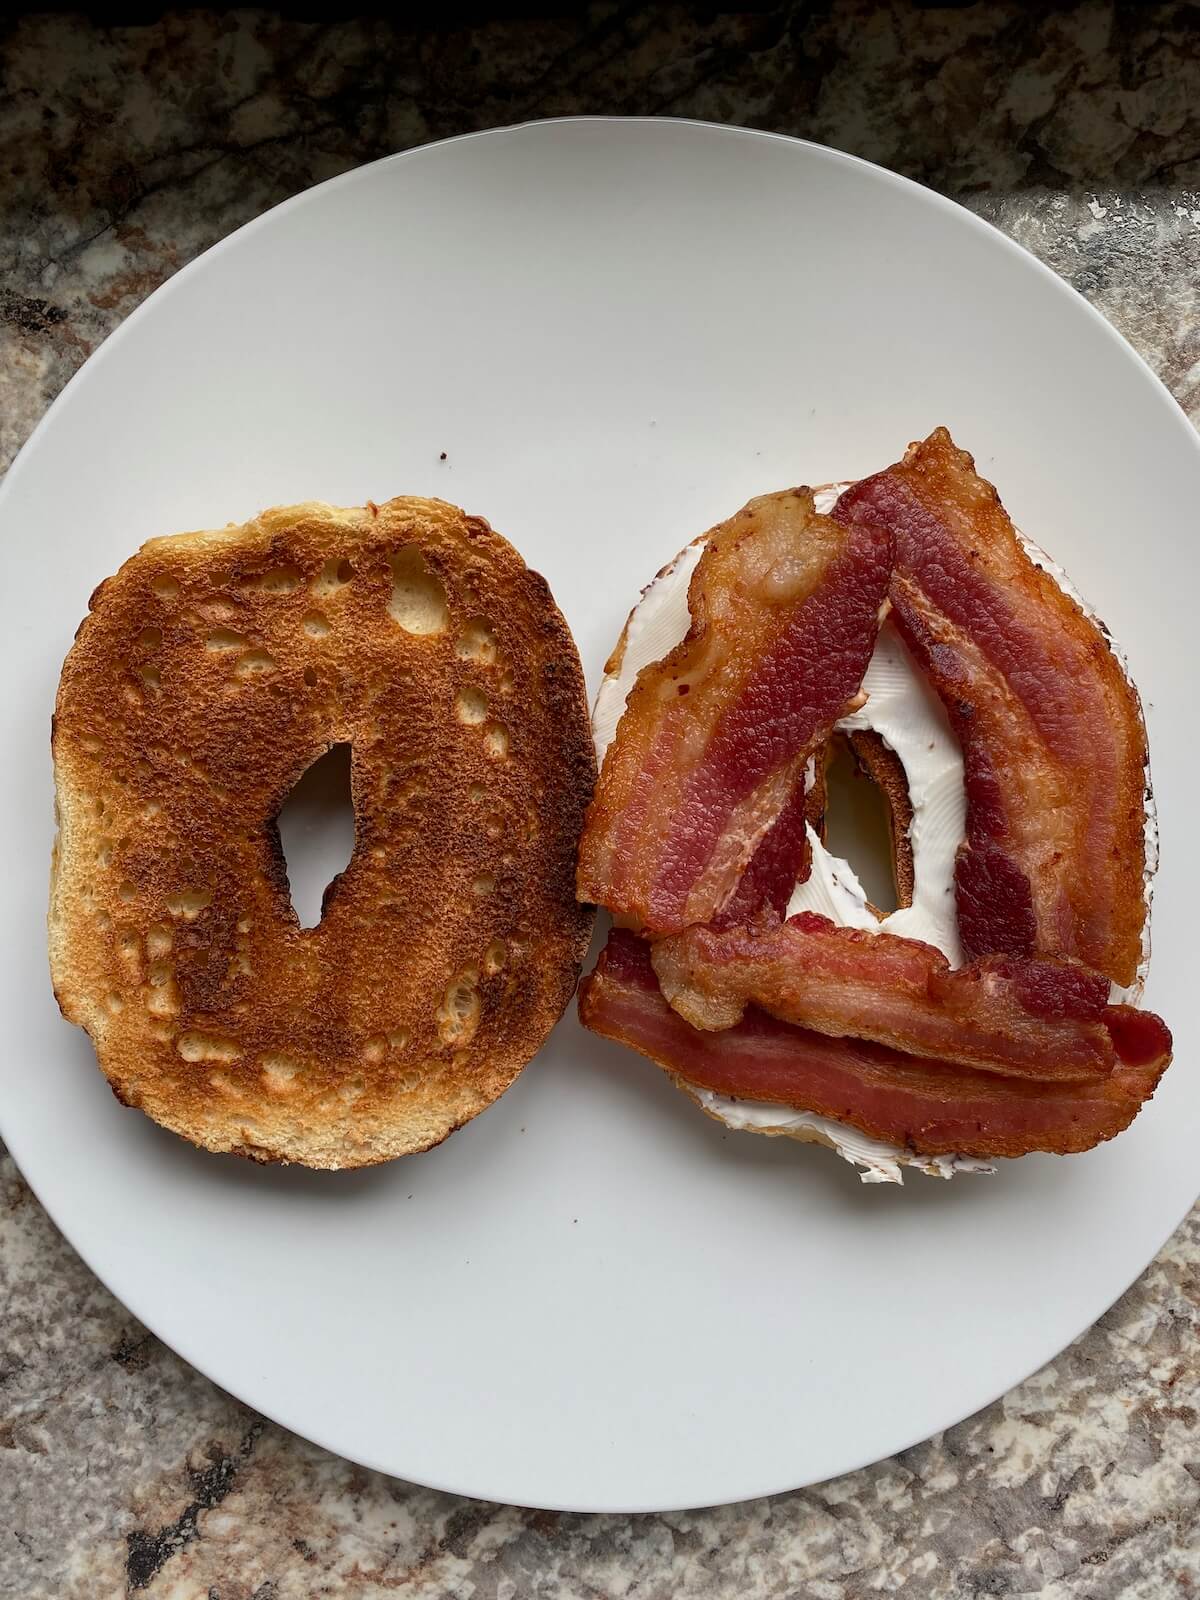 Bacon slices and cream cheese on one half of a bagel on a white plate.